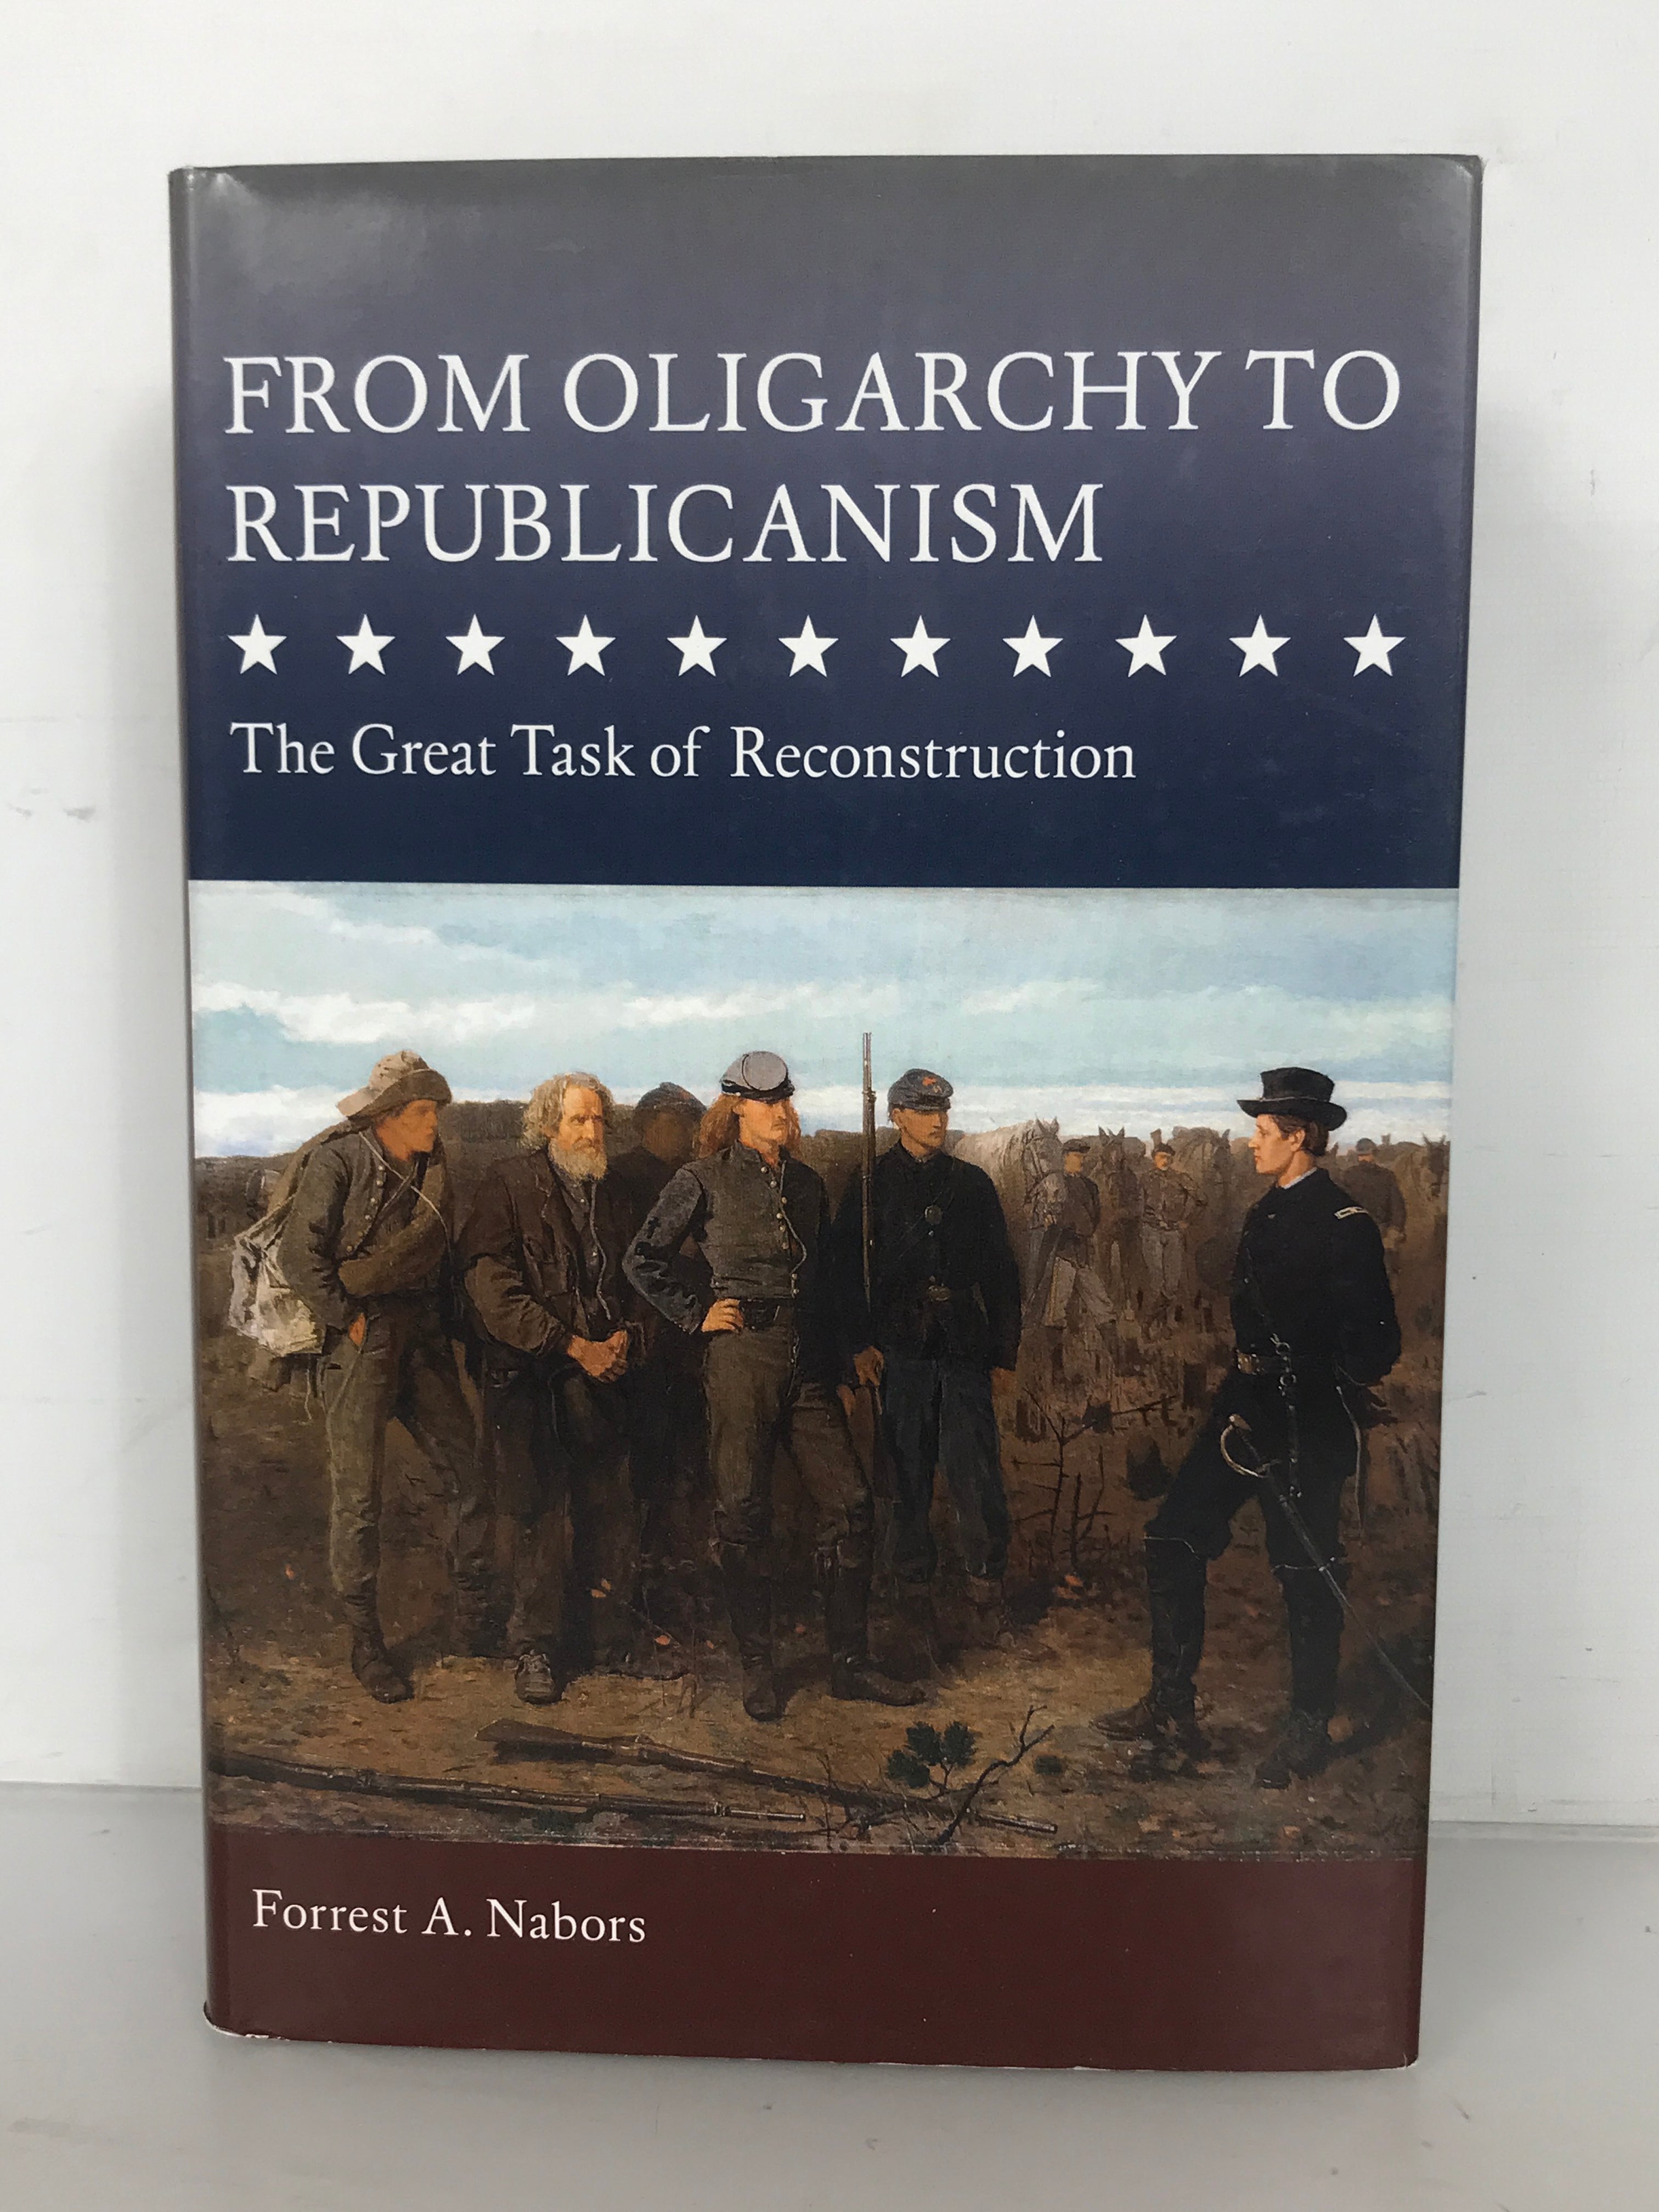 From Oligarchy to Republicanism by Forrest A. Nabors Signed 2017 HC DJ